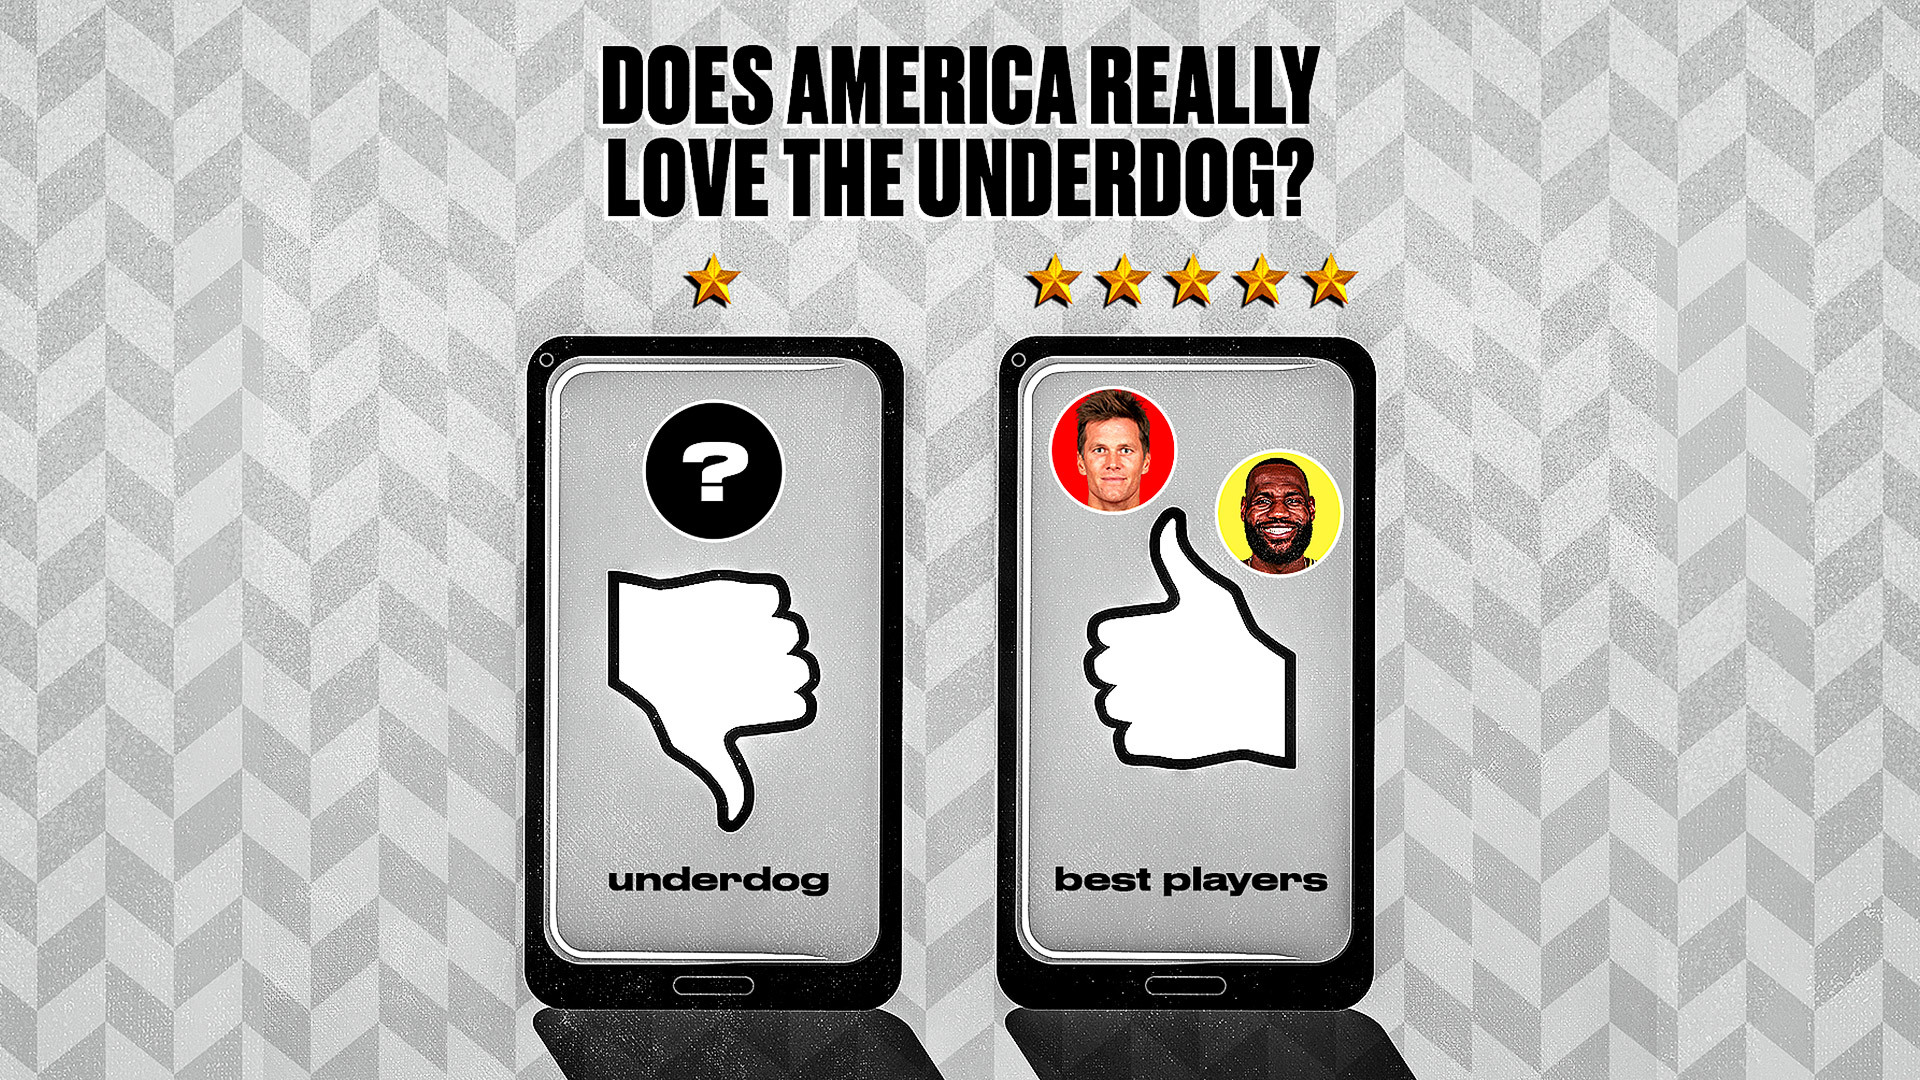 Does America love the underdog? Colin Cowherd says no